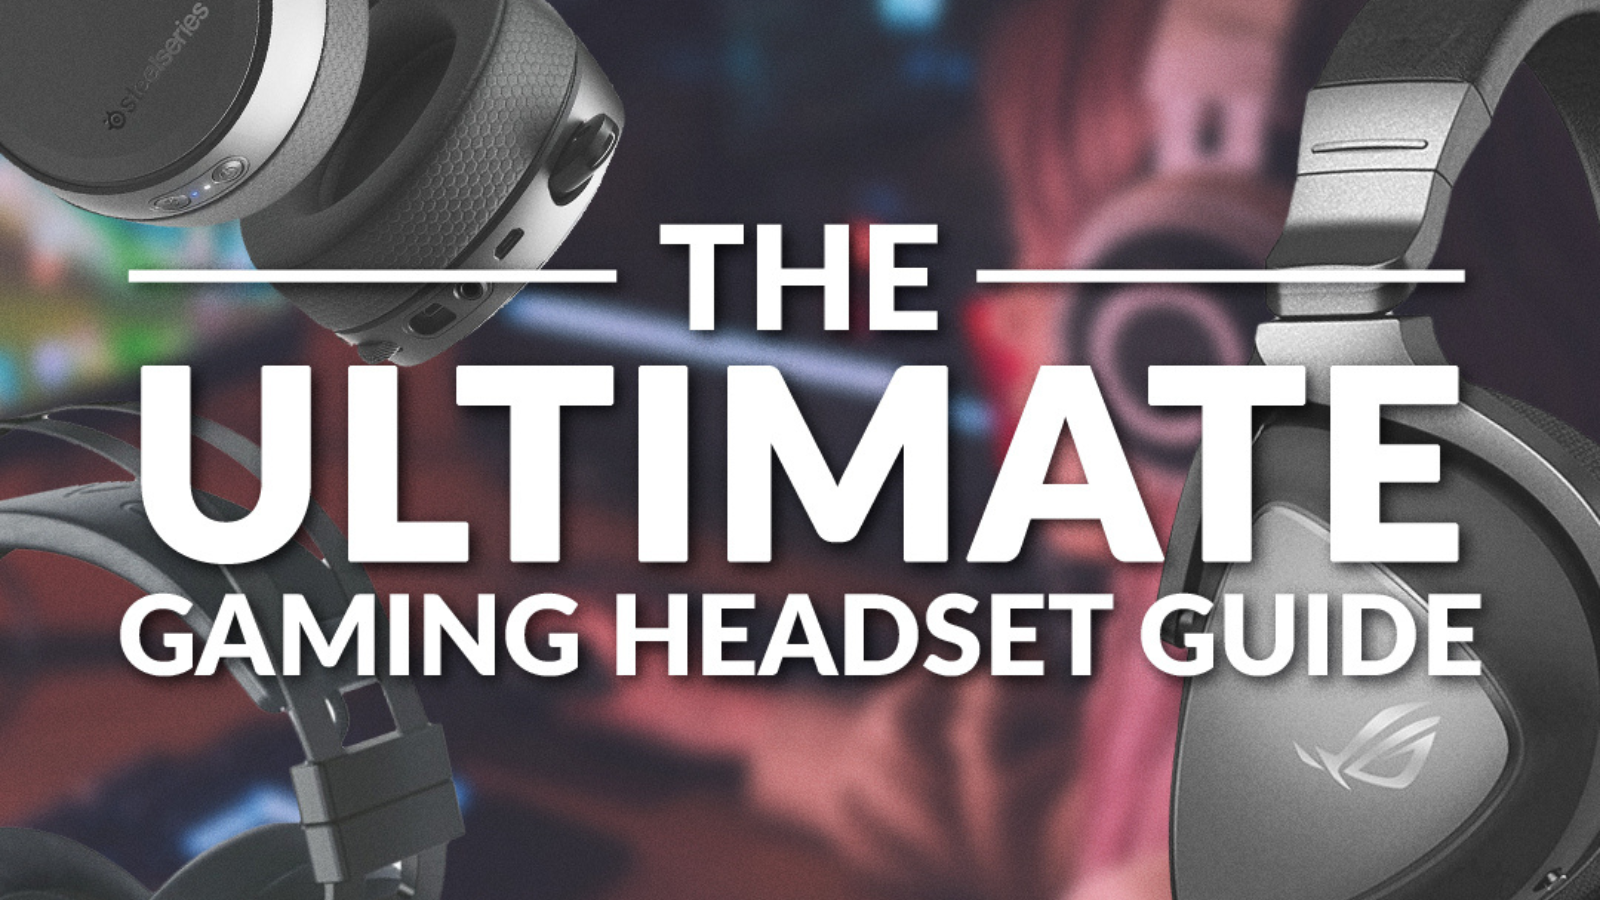 The Ultimate Gaming Headset Guide